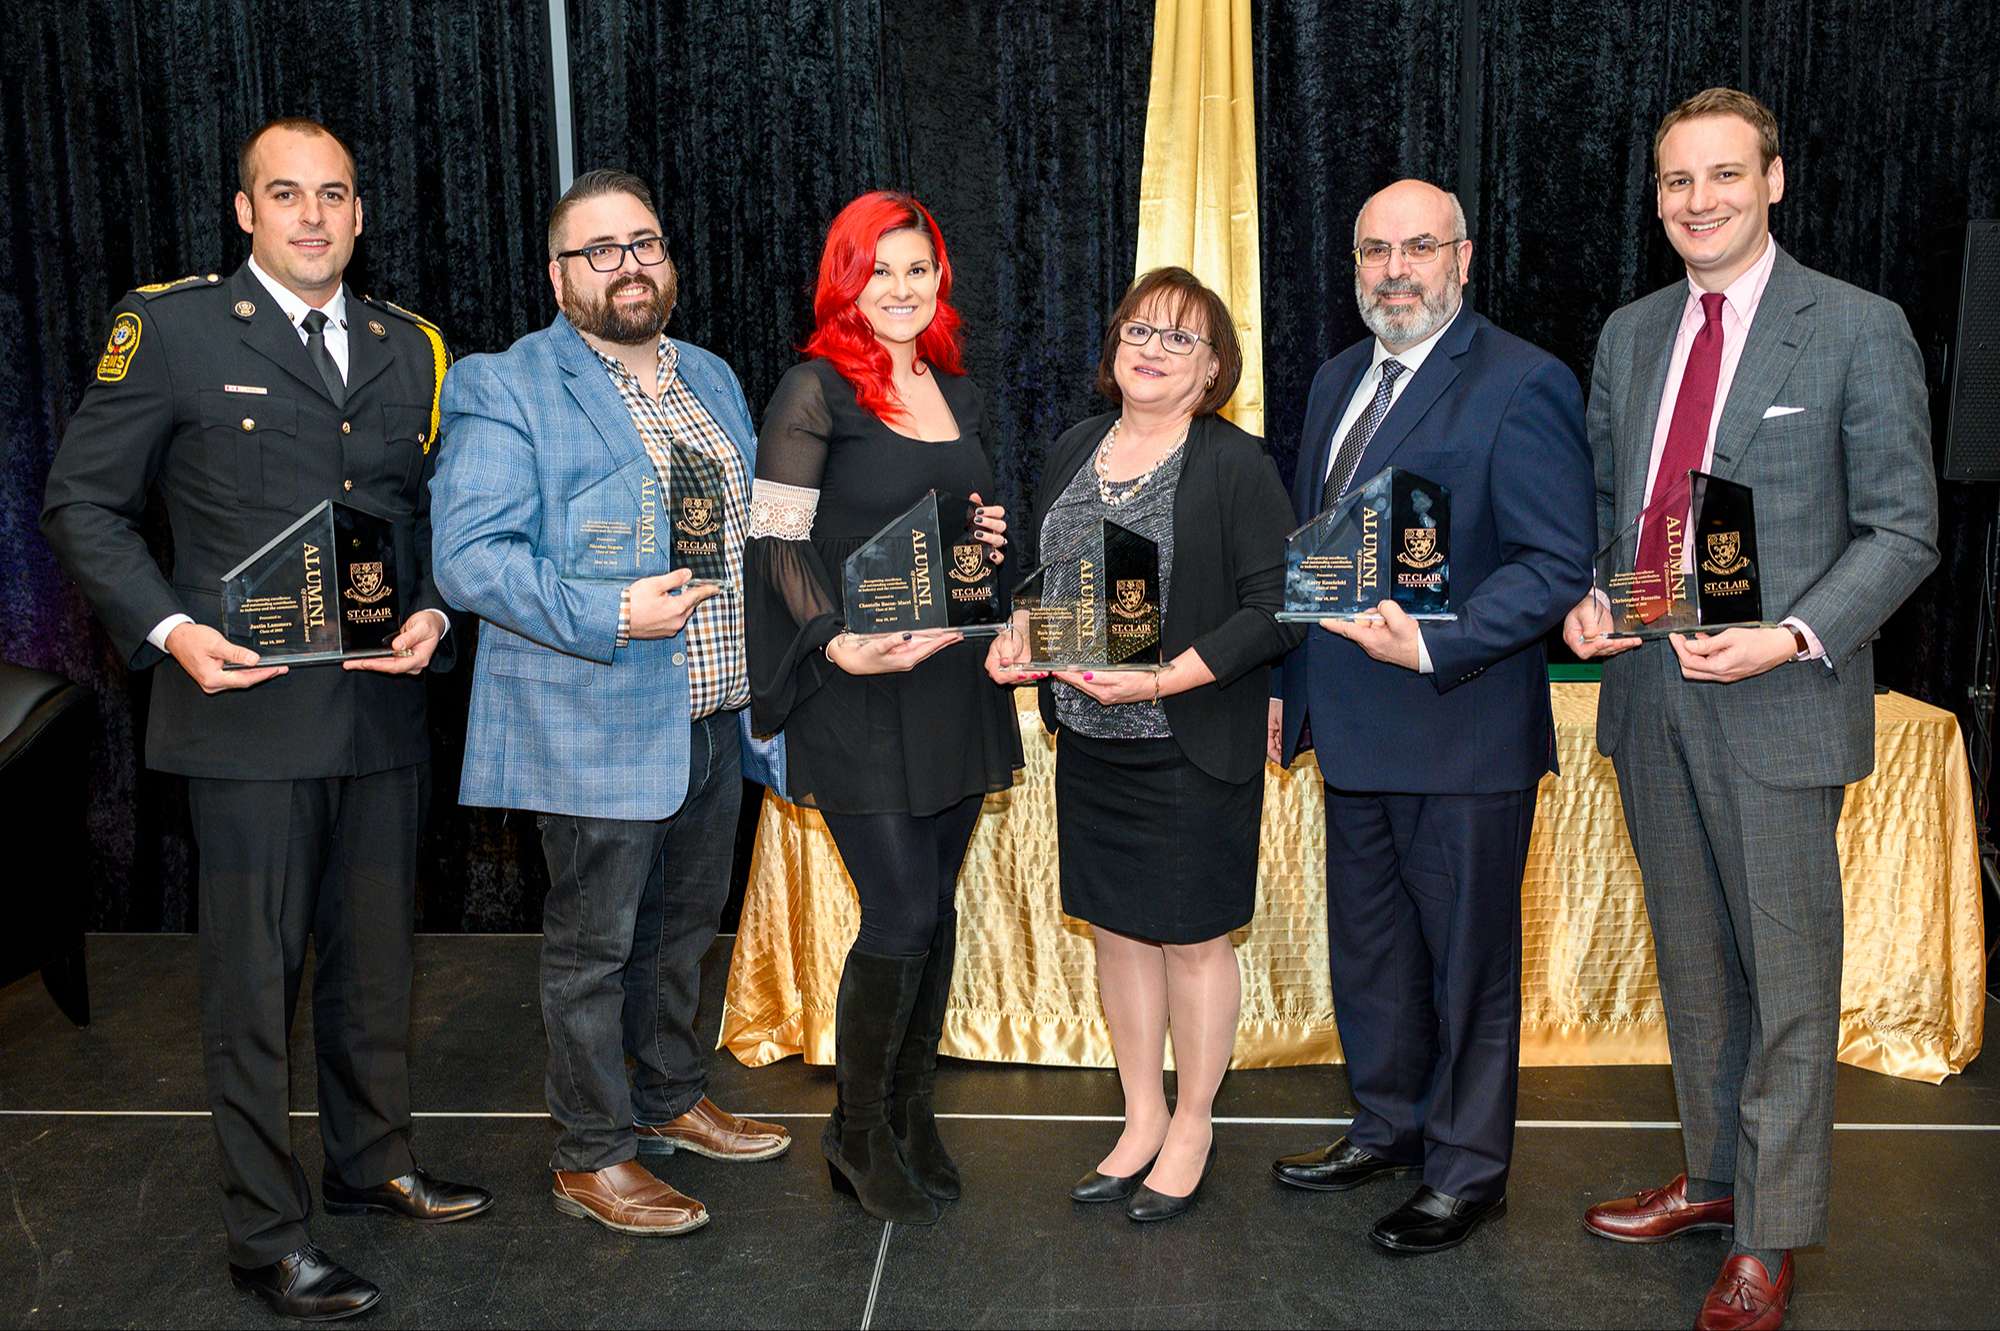 The 2019 alumni of distinction recipients with their trophy's.